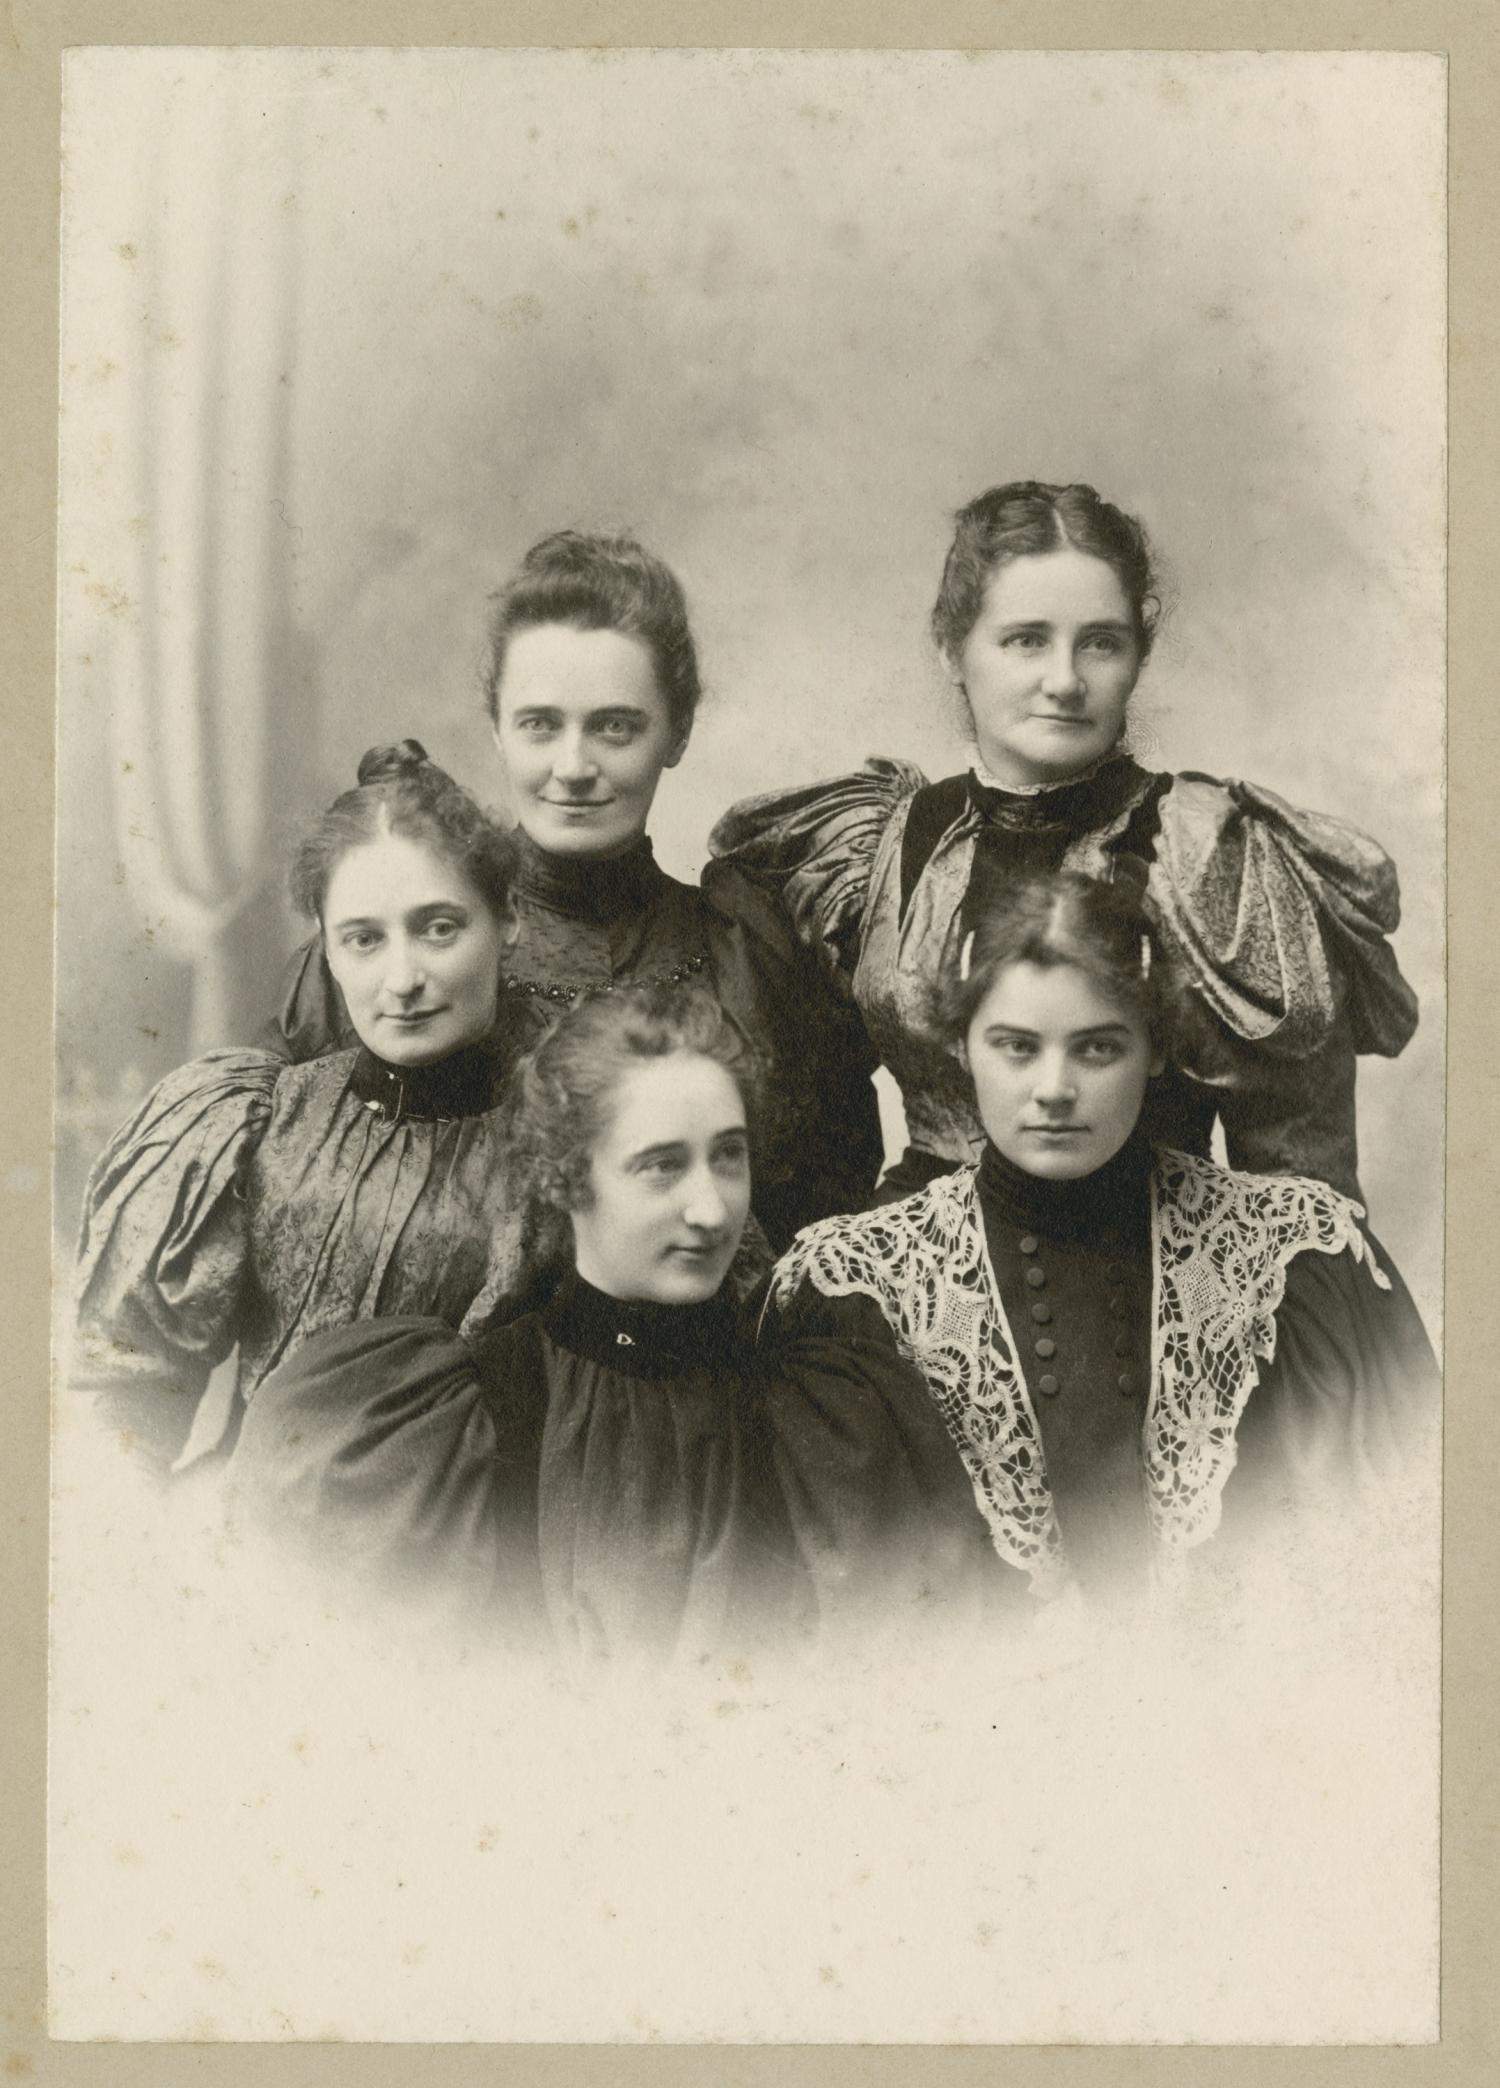 Photograph of Emily Carr and her sisters, possibly taken just prior to her departure for art studies in England, 1899.